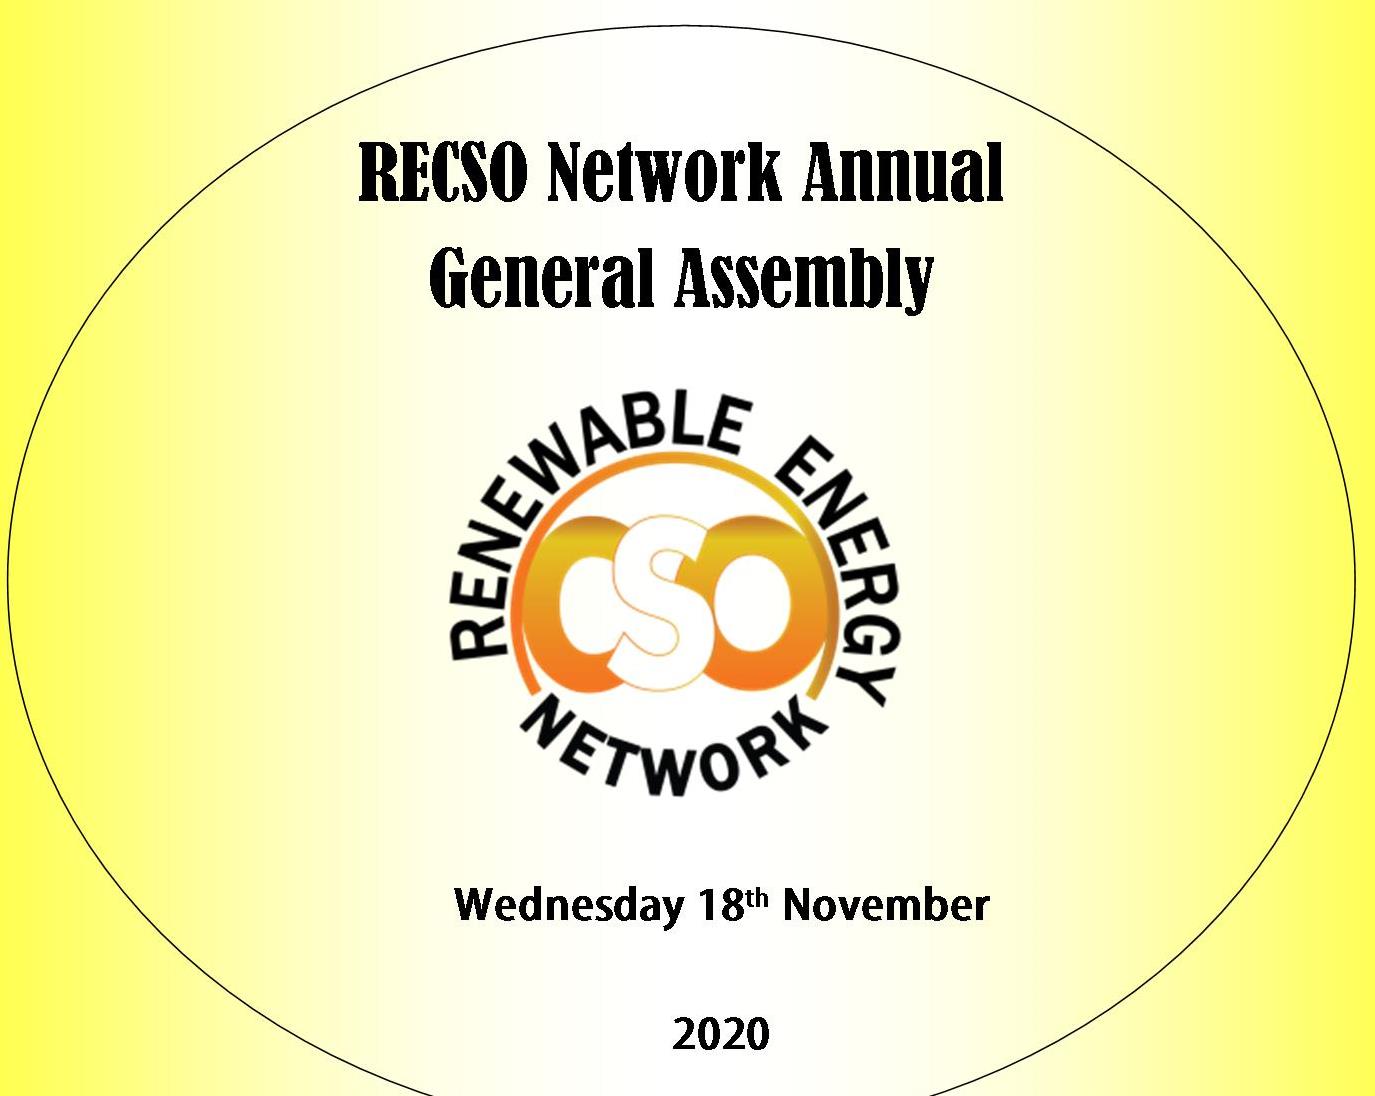 Annual general meeting (AGM) for The Renewable energy CSO Network,scheduled for 18th November 2020